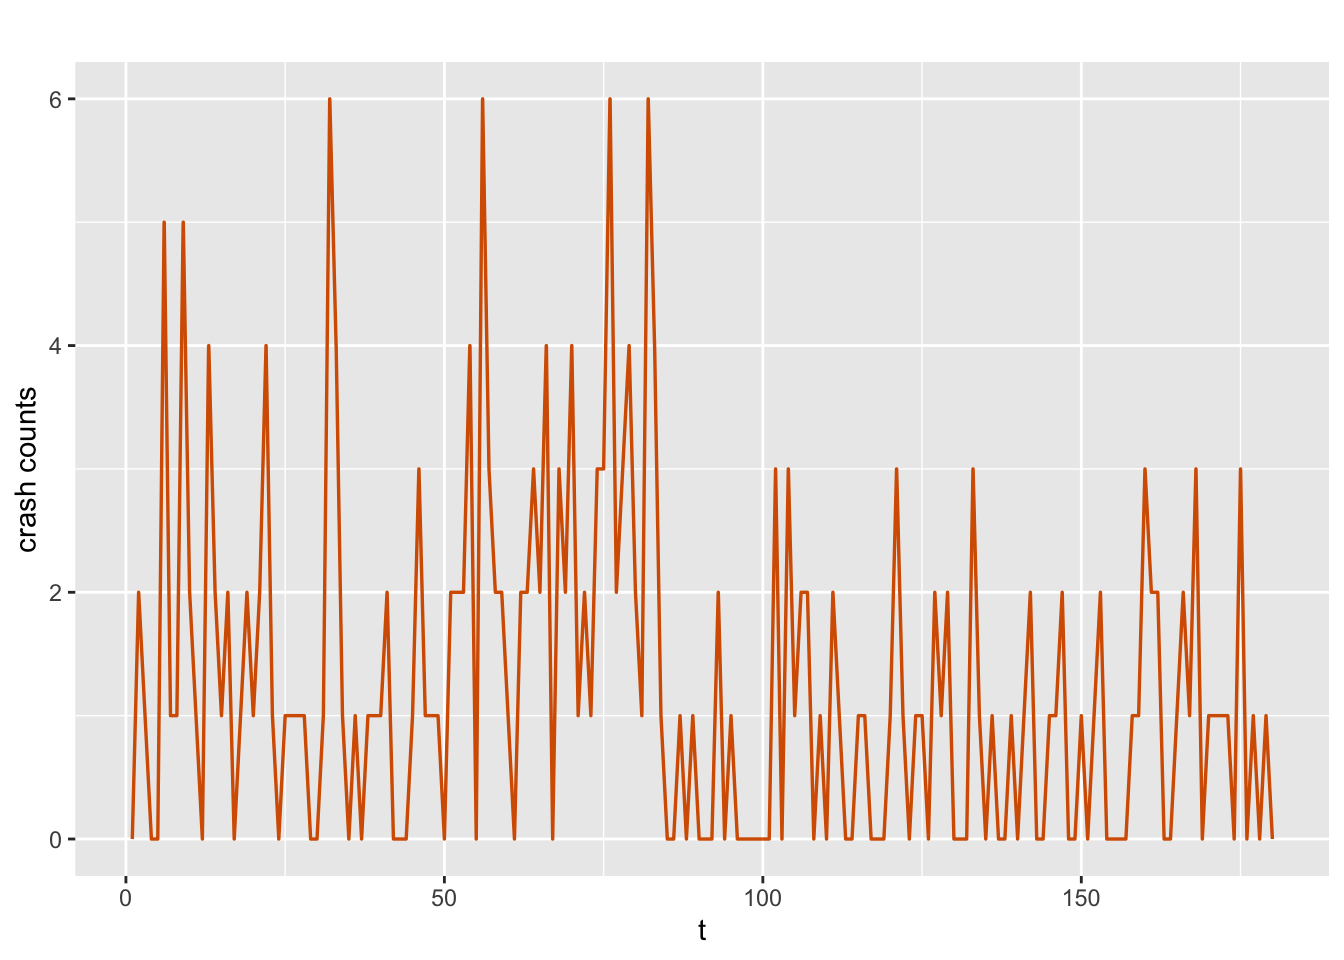 Time series of crash counts.